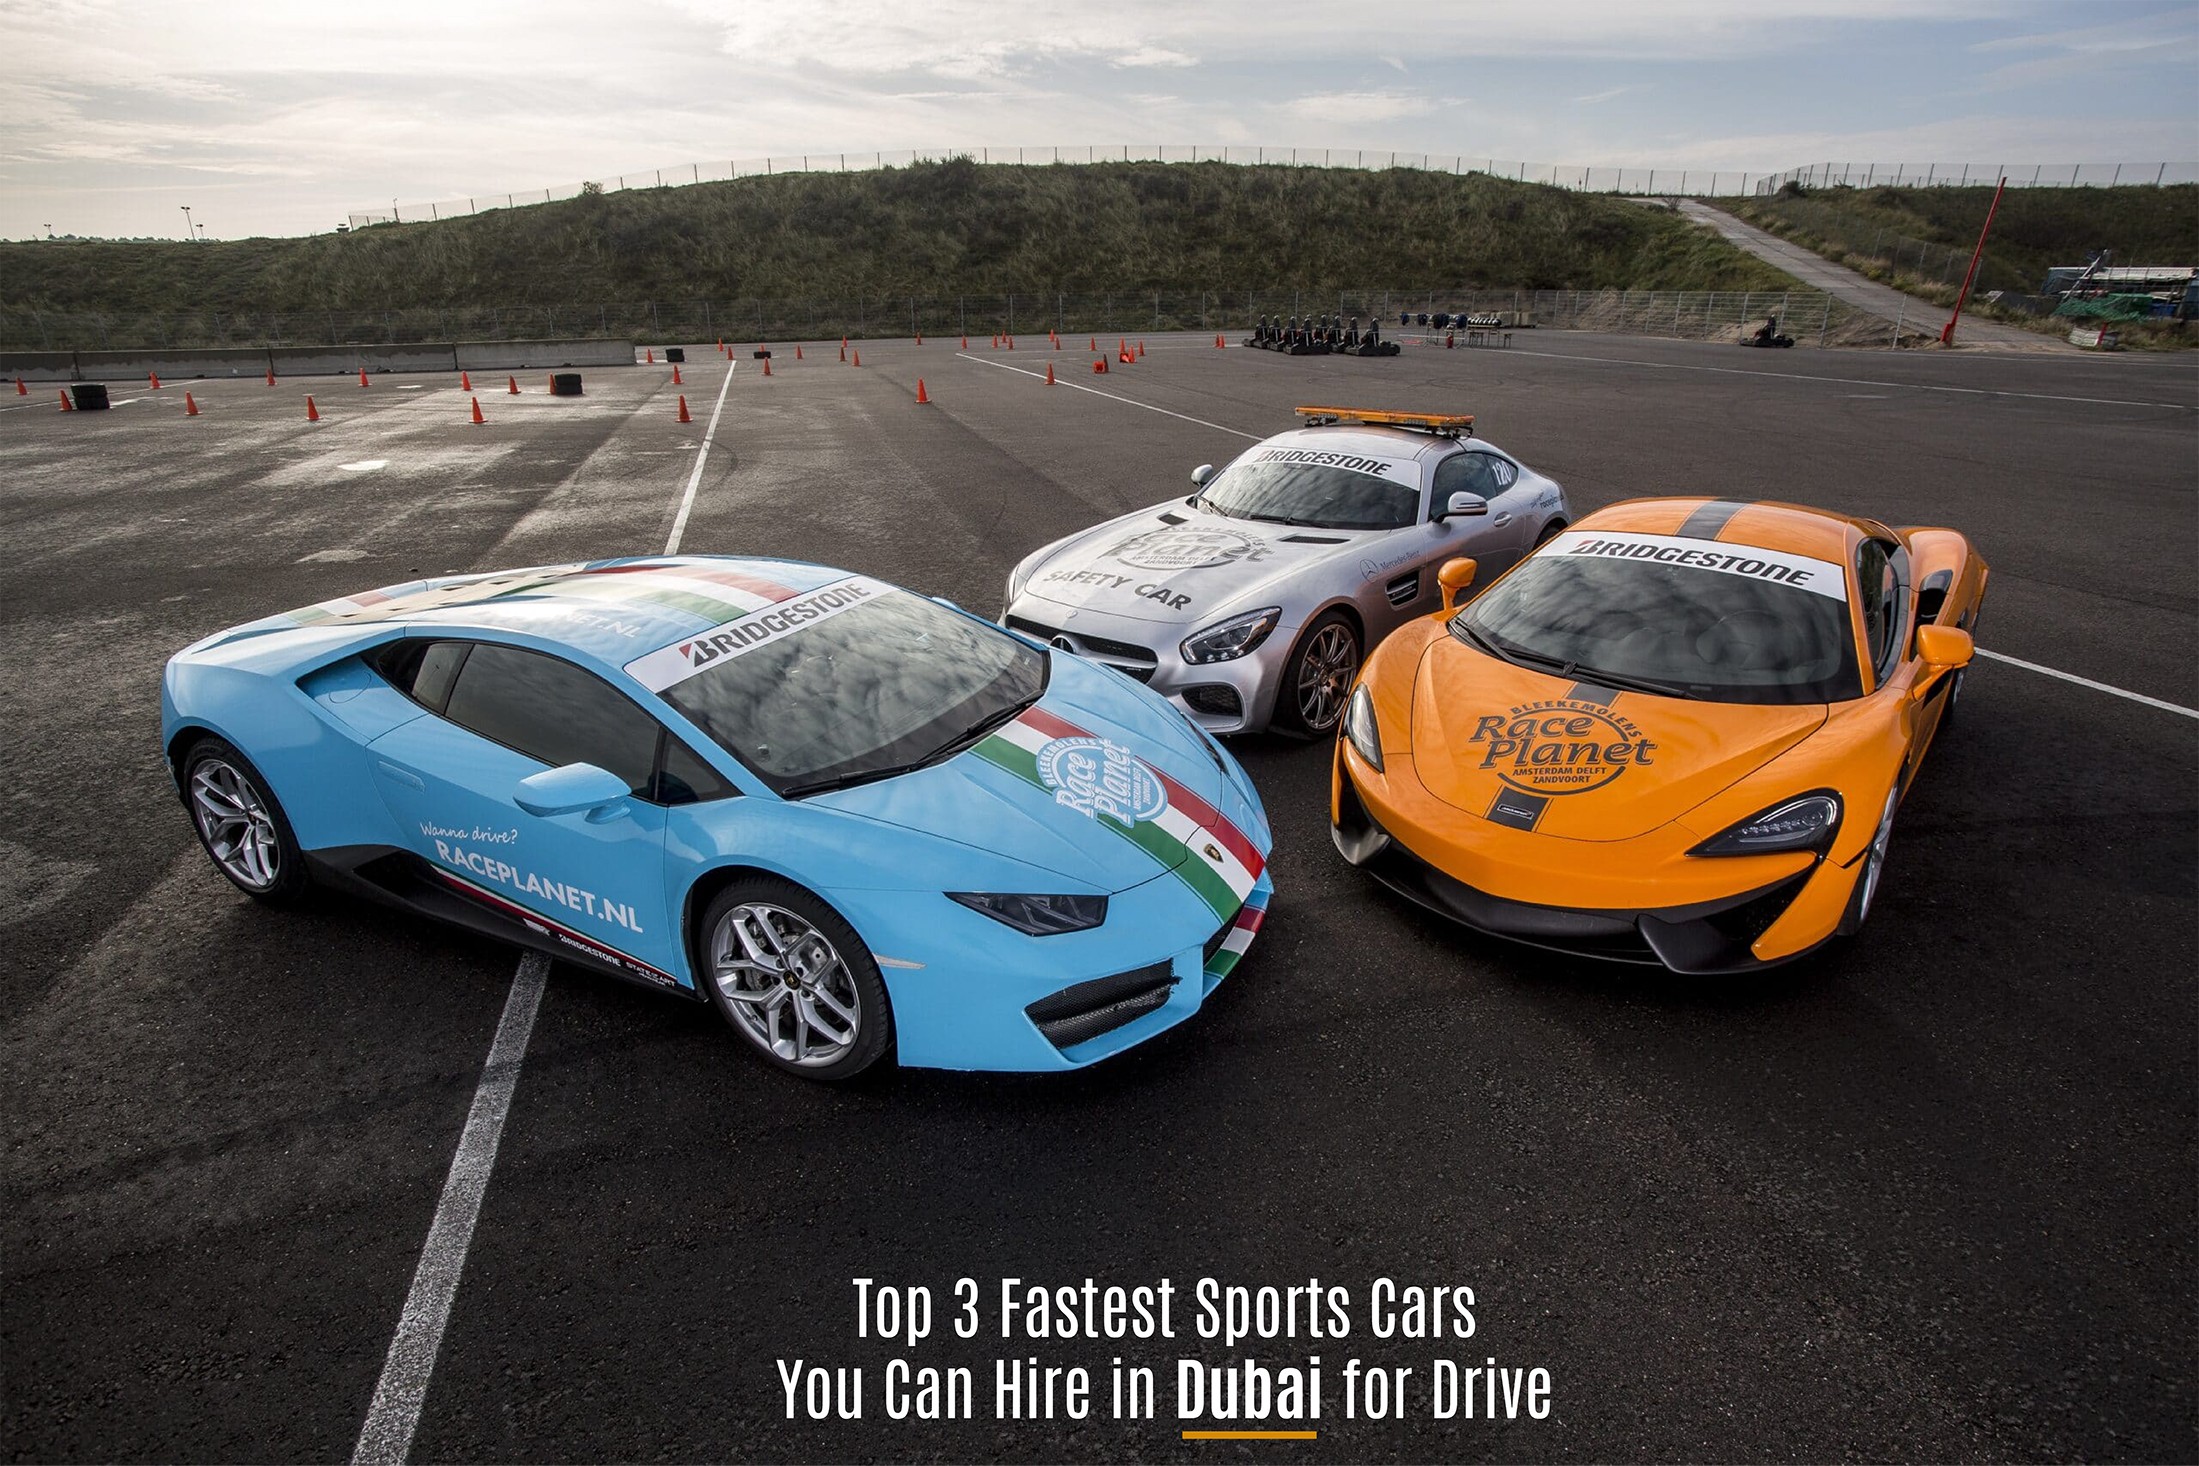 Top 3 Fastest Sports Cars You Can Hire in Dubai for Drive